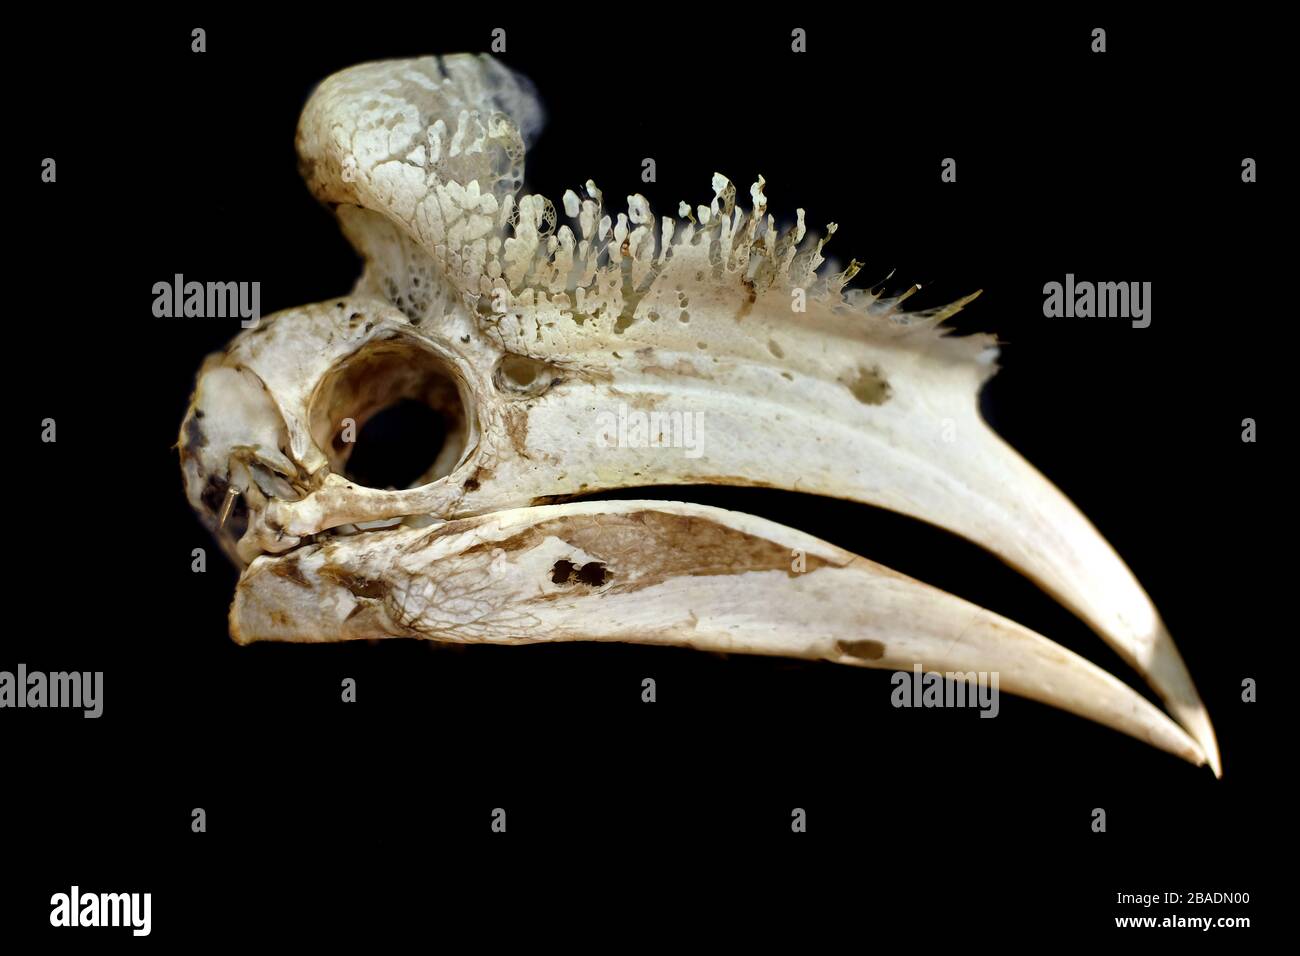 Male black hornbill skull,(Anthracoceros malayanus) showing the bone structure of the casque. Stock Photo